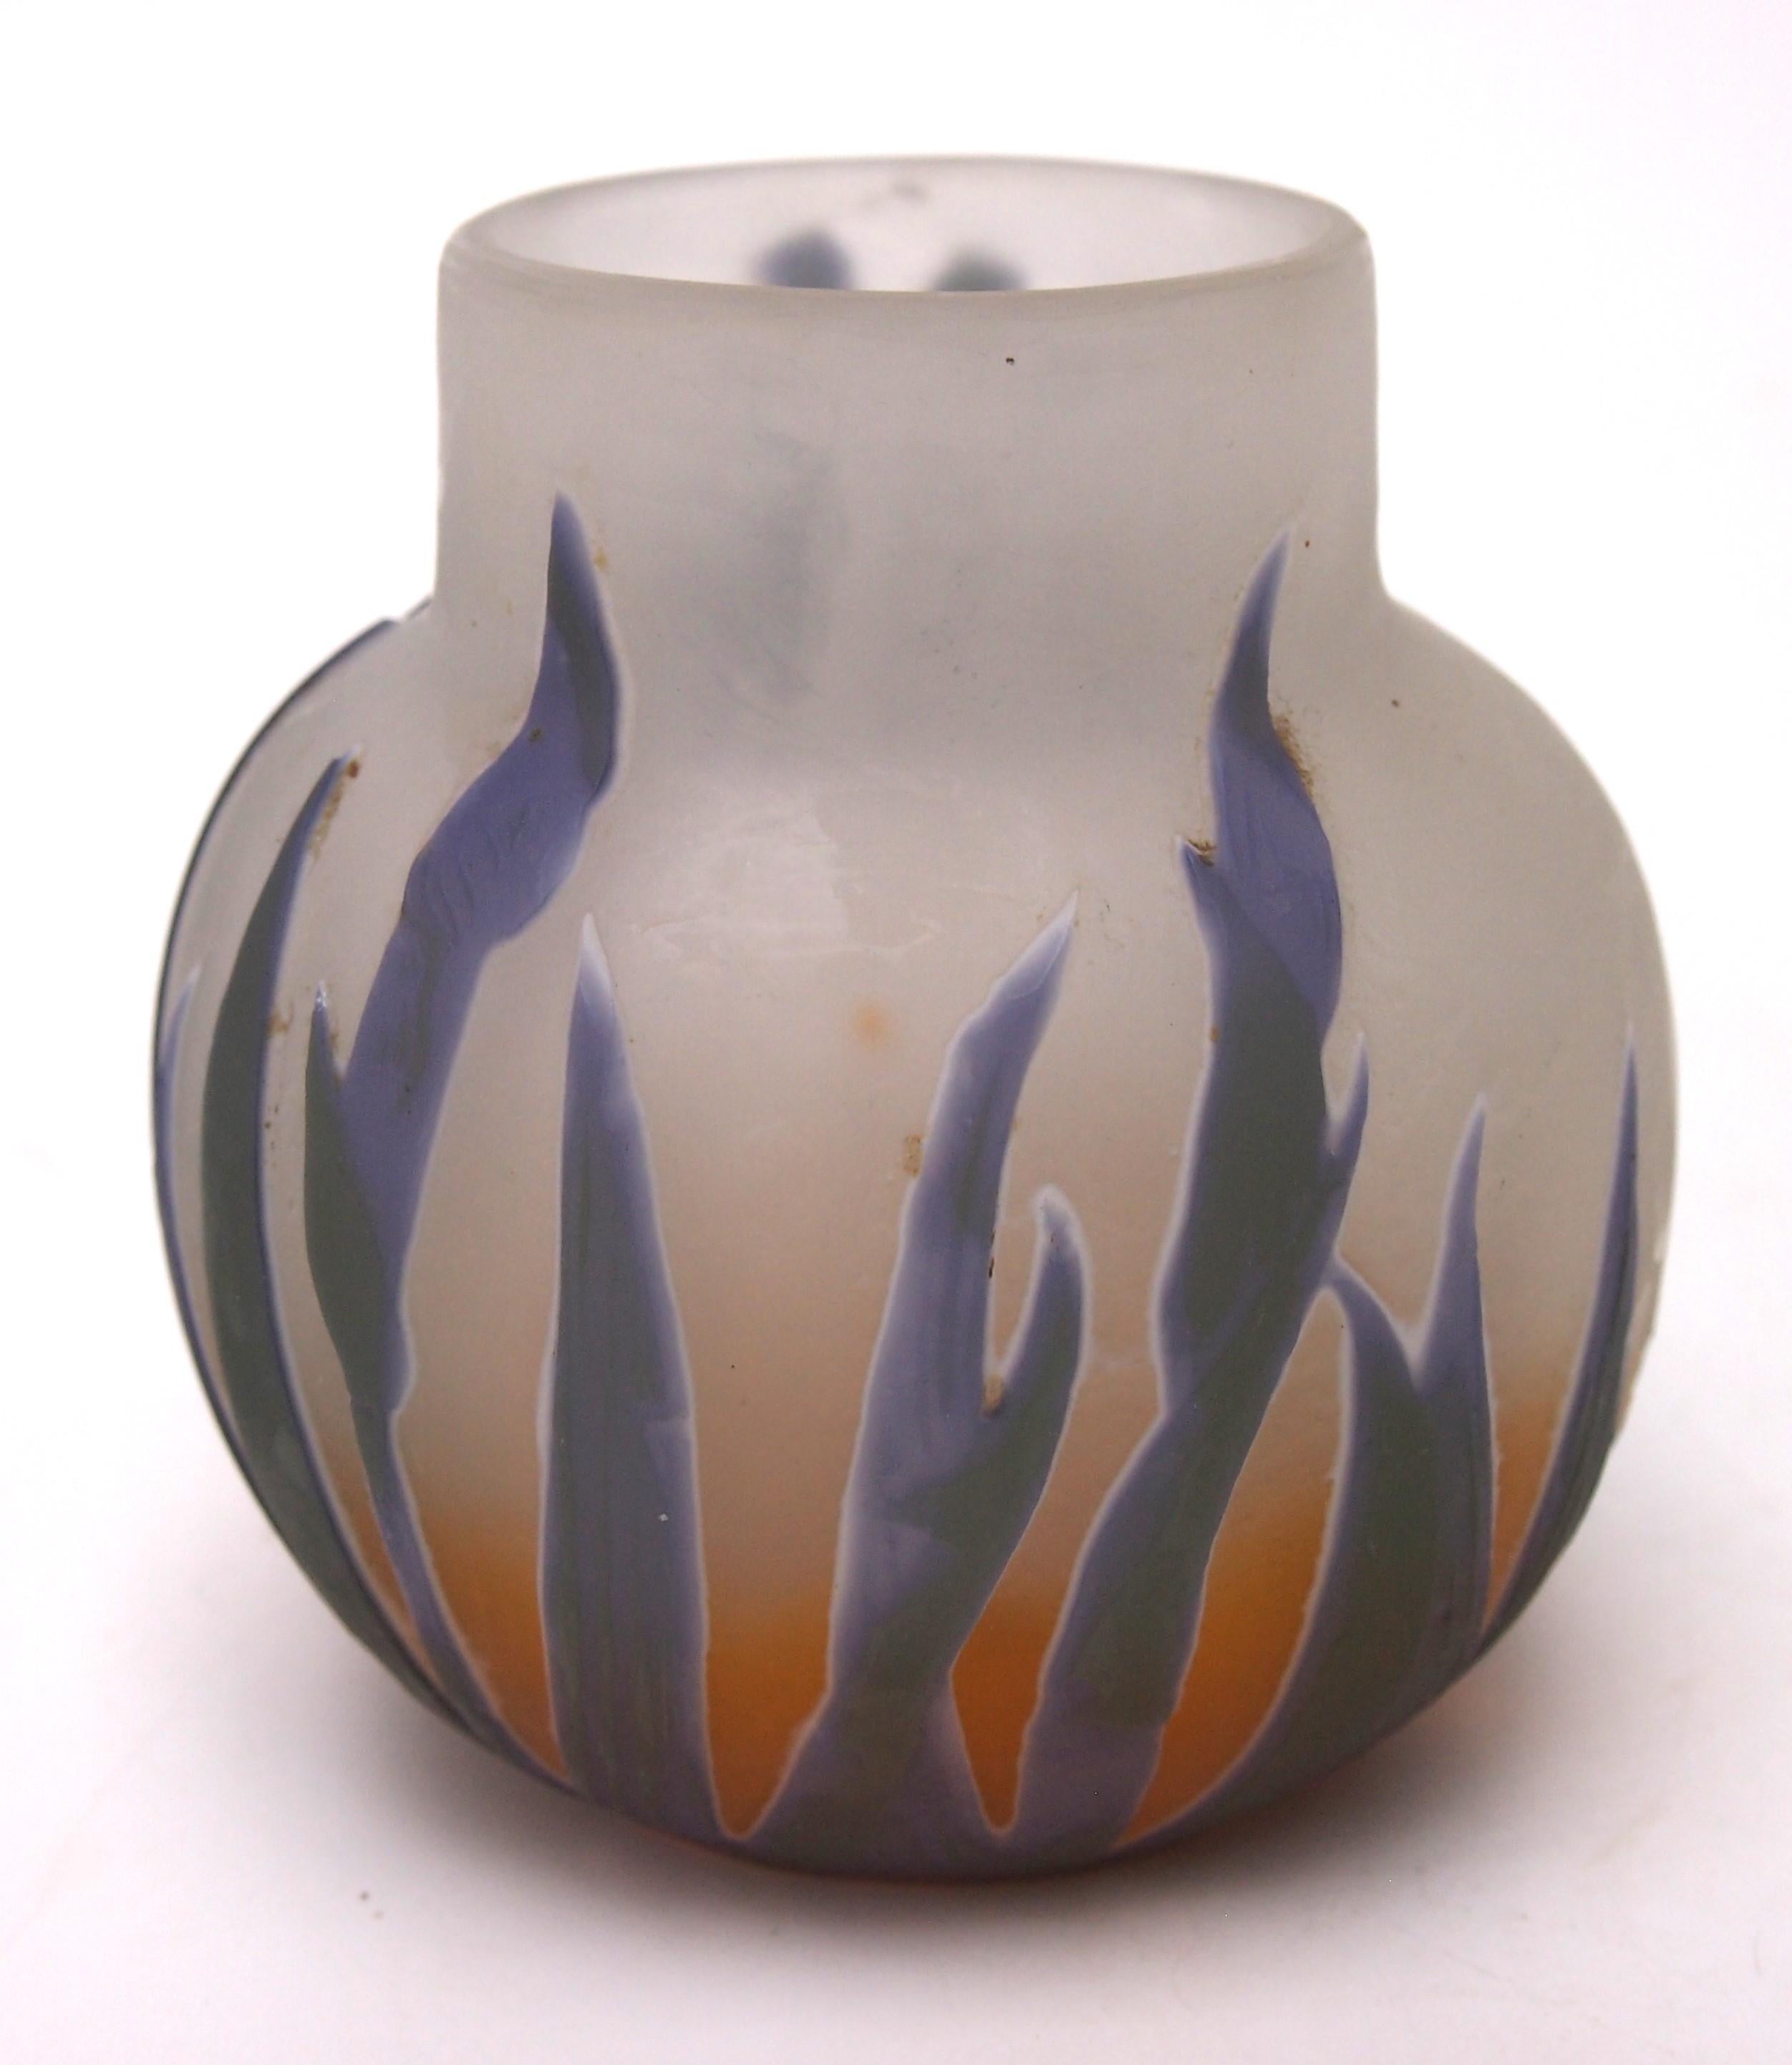 Rare French Art Nouveau 4 colour Emile Galle Cameo Glass Vase -With Irises c1908 In Good Condition For Sale In Worcester Park, GB